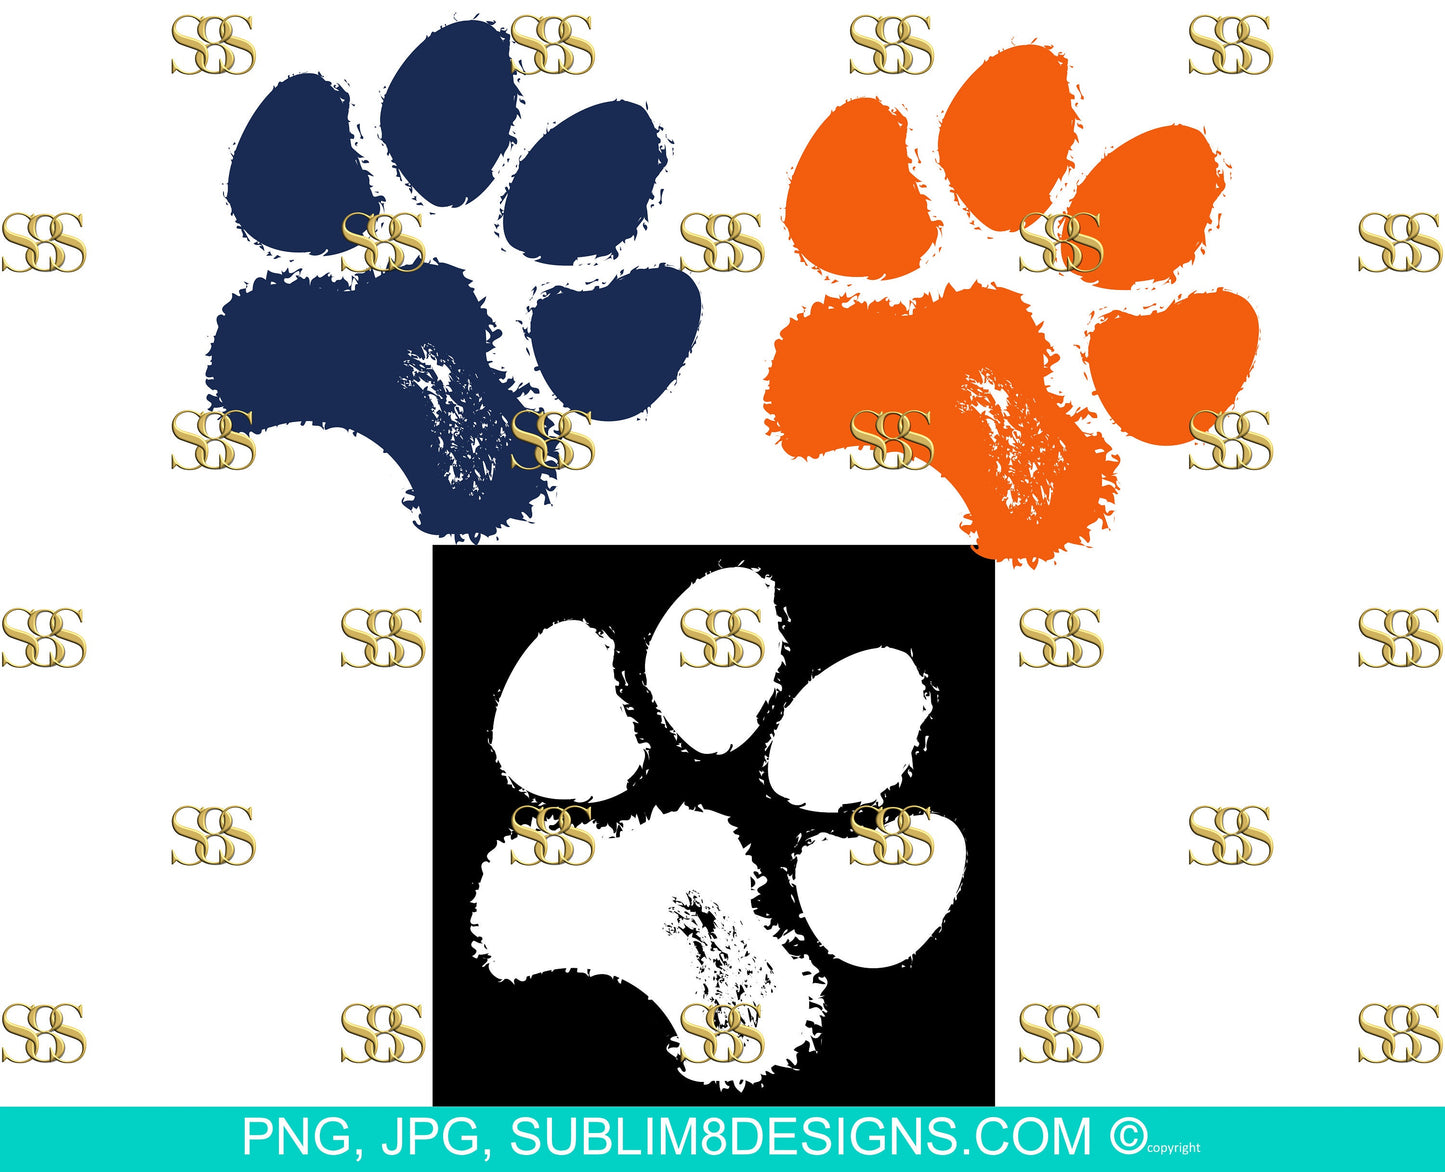 Paw Prints White, Navy Blue and Orange PNG ONLY